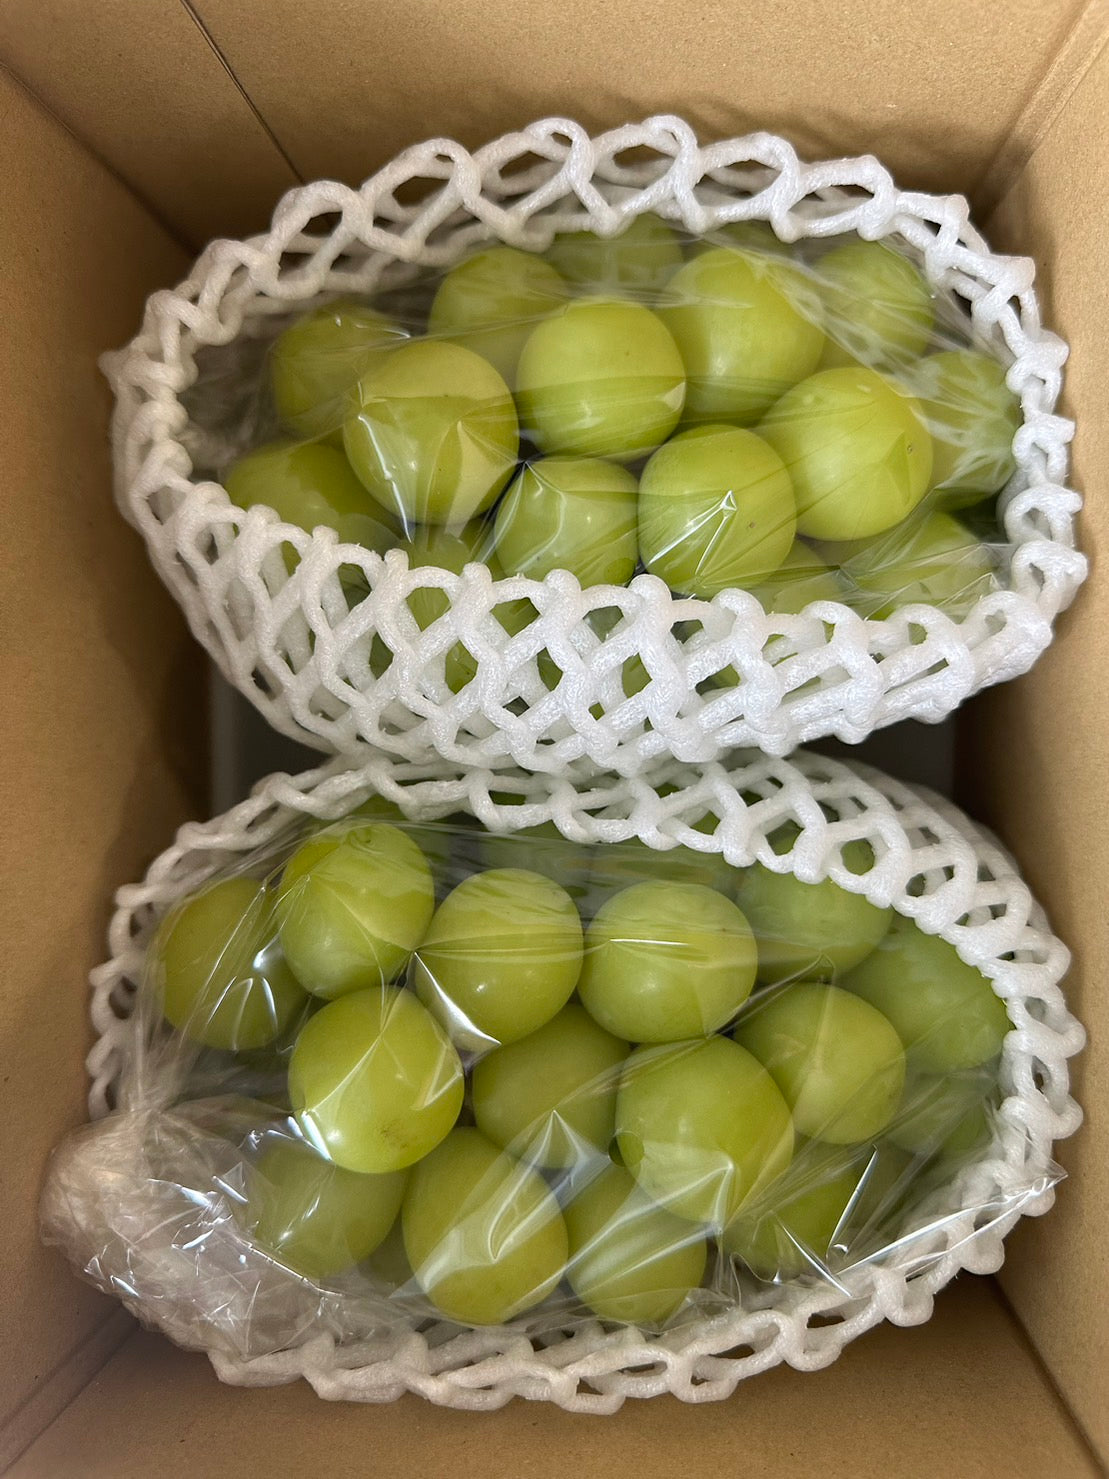 【Limited Sets Order Deadline Jan. 30! For Thailand Customers Only Shipping Included　‐ Delivery scheduled for early February, Great Gift for Lunar New Year】Farm to Table Yamanashi Shine Muscat Grapes| Taste of Japan